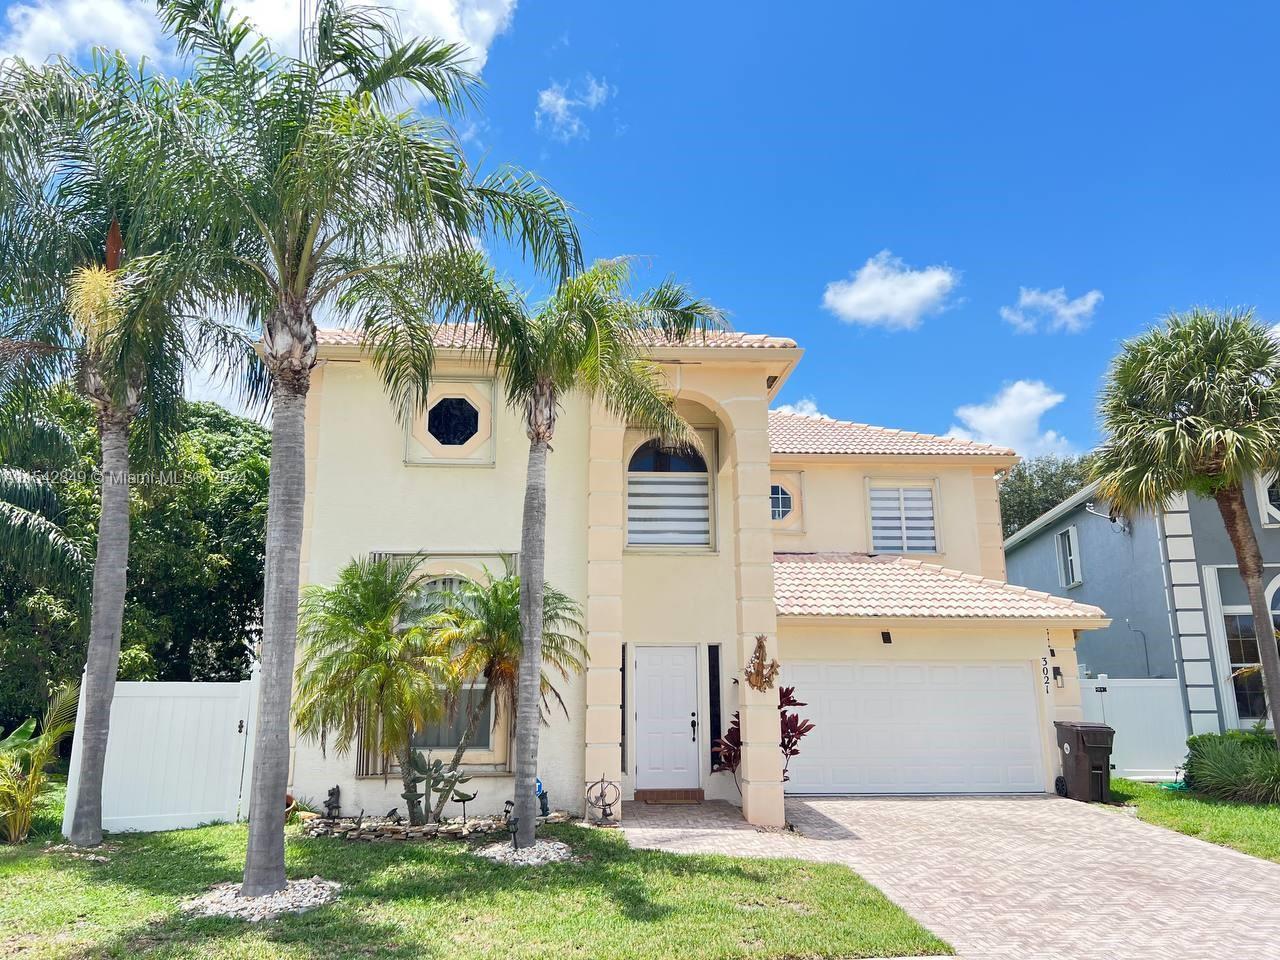 Photo of 3021 El Camino Real in West Palm Beach, FL